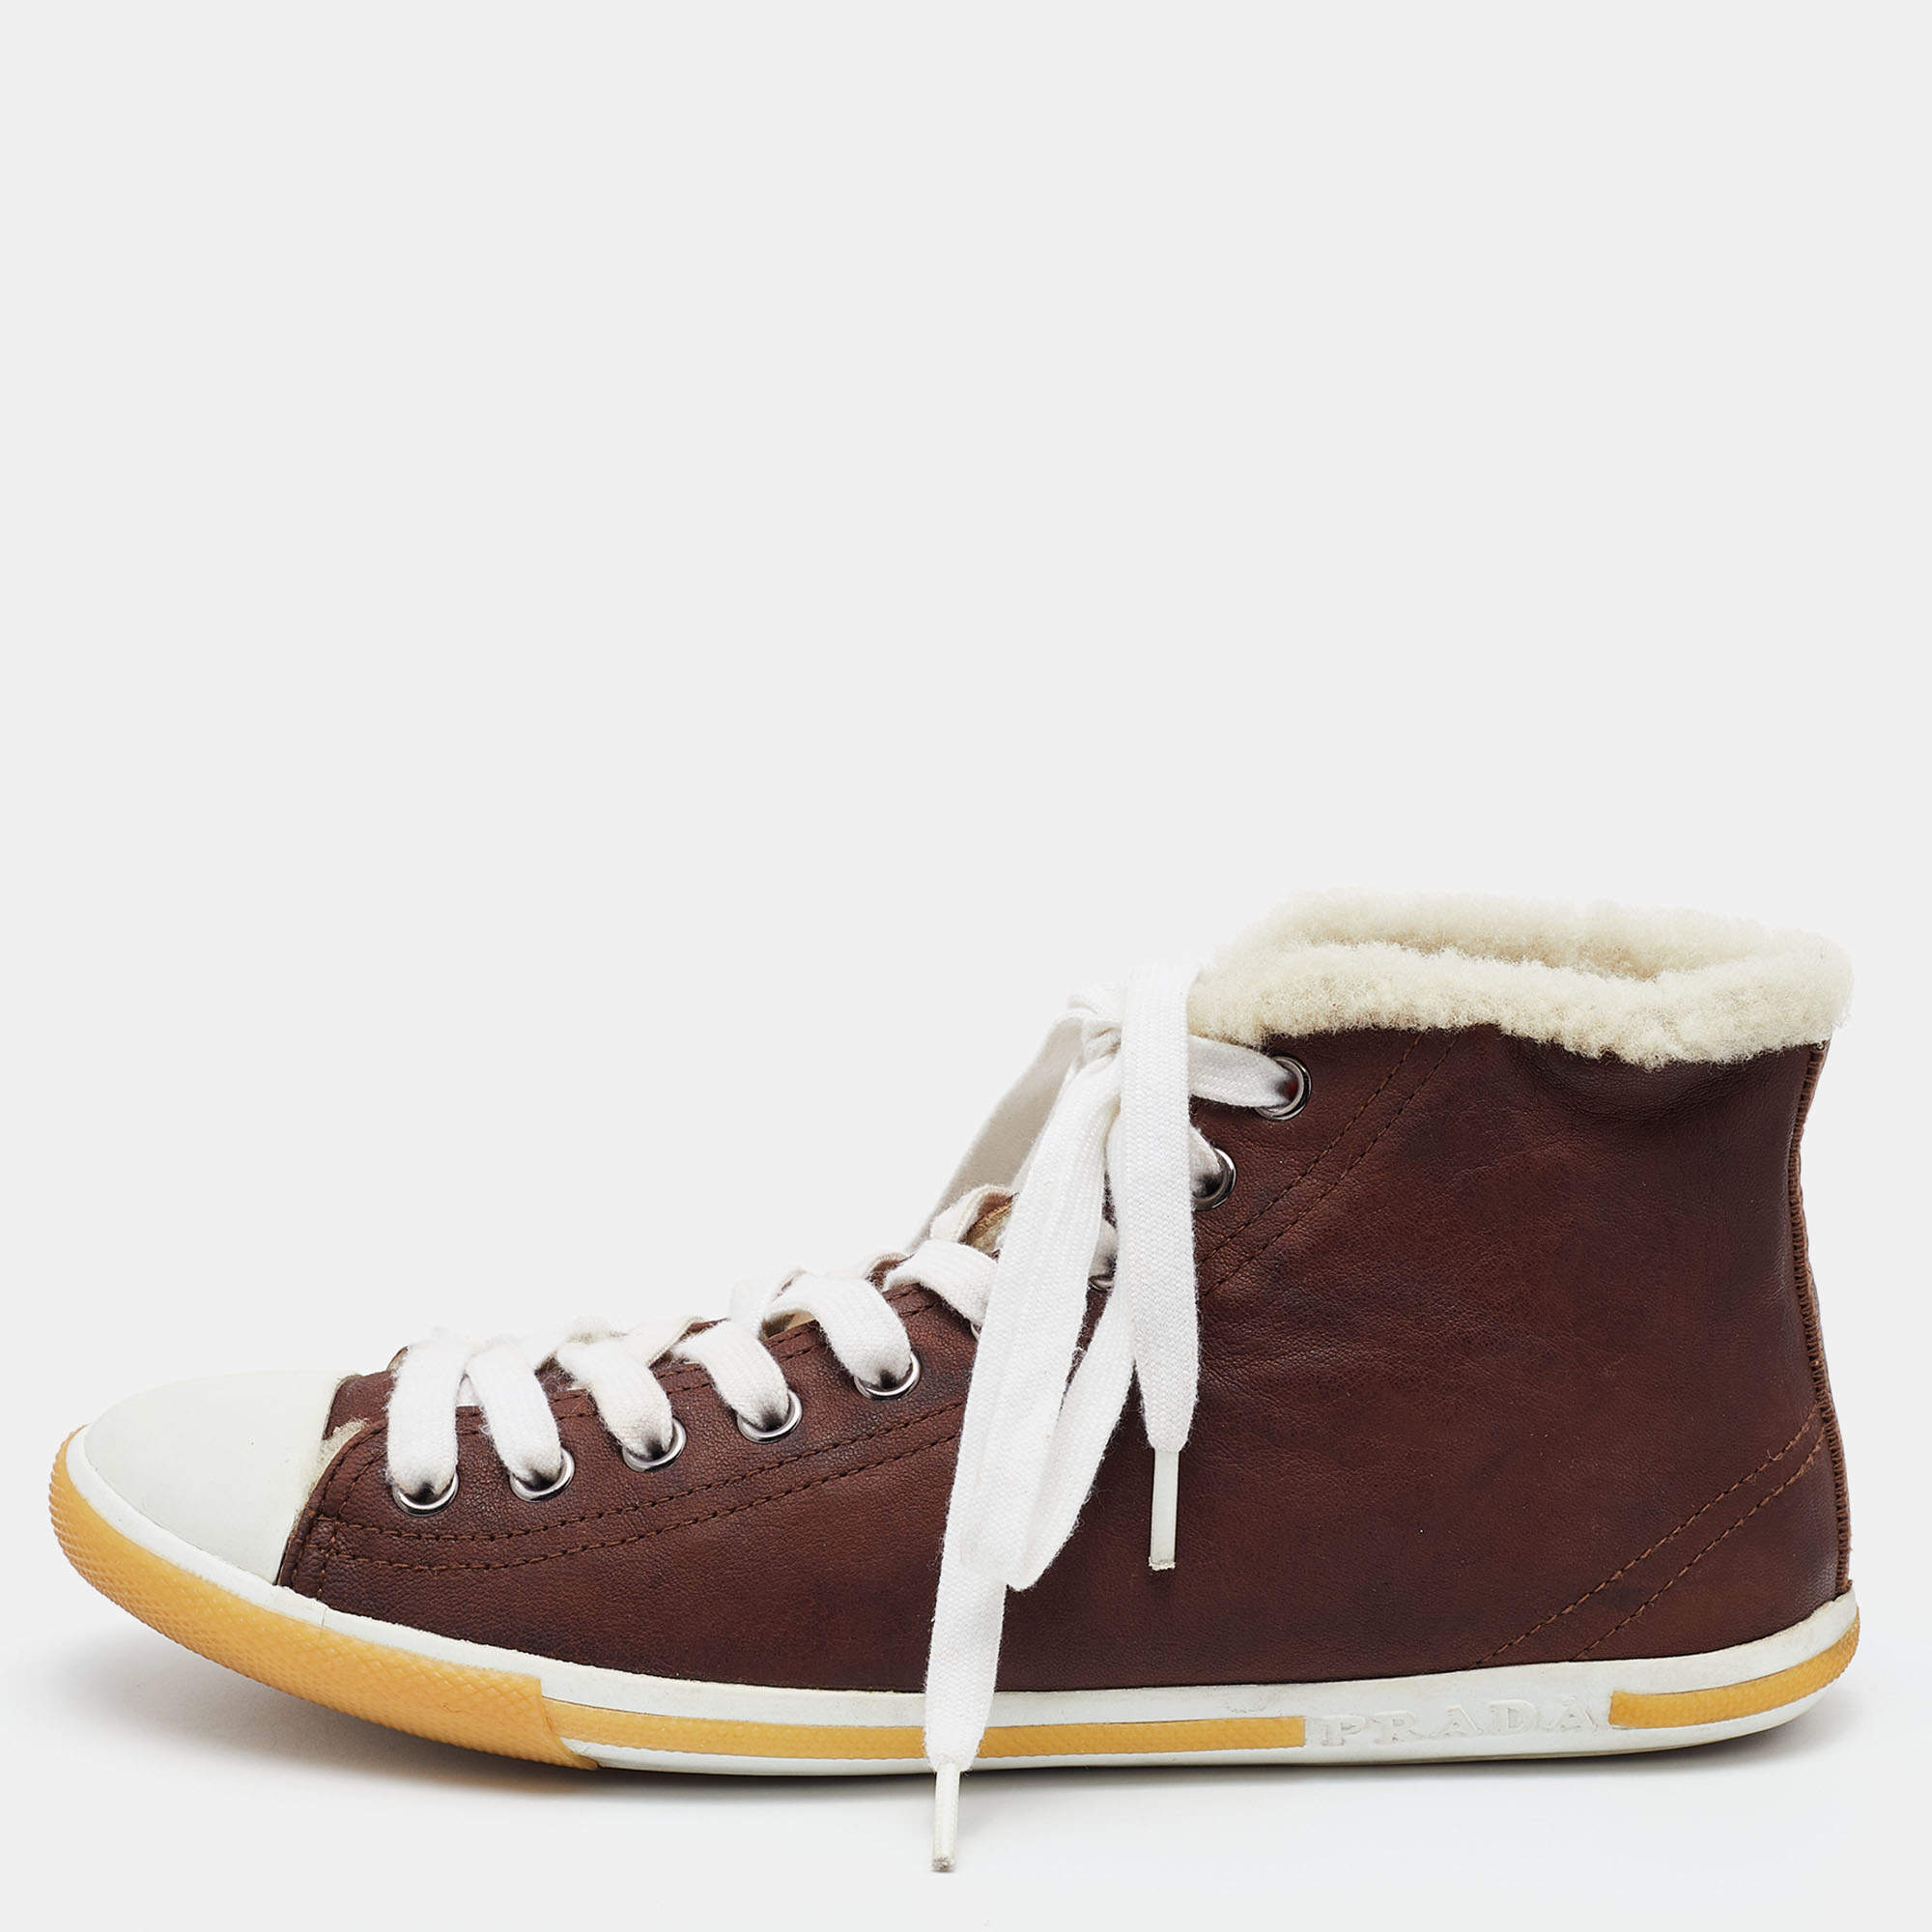 Prada Brown/White Nubuck Leather and Shearling Fur Lace Up Sneakers Size 39